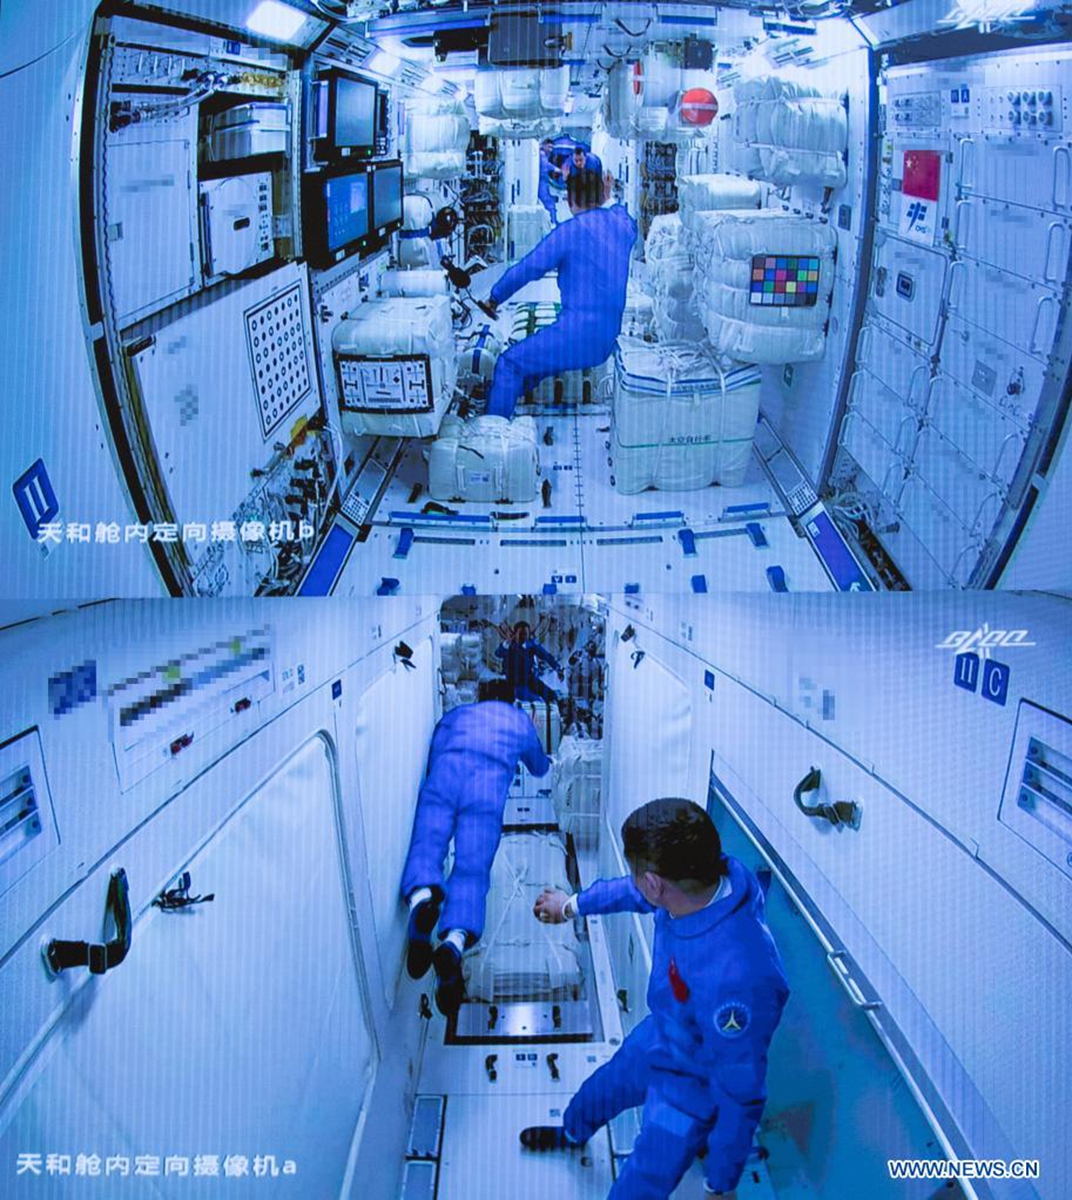 Screen image captured at Beijing Aerospace Control Center in Beijing, capital of China, June 17, 2021 shows three Chinese astronauts onboard the Shenzhou-12 spaceship entering the space station core module Tianhe. Photo: Xinhua